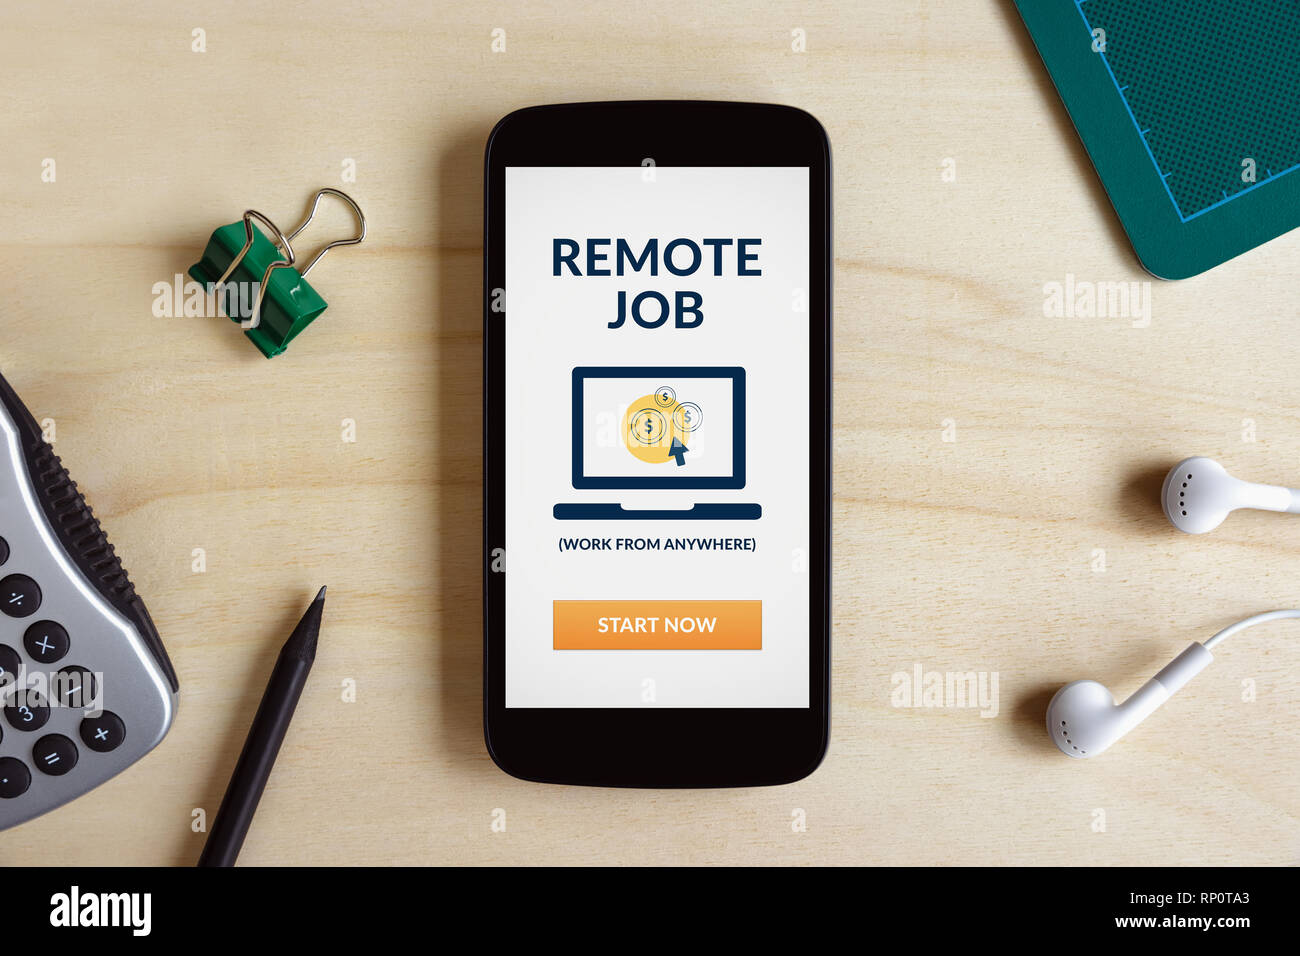 Remote job concept on smart phone screen on wooden desk. All screen content is designed by me. Flat lay Stock Photo